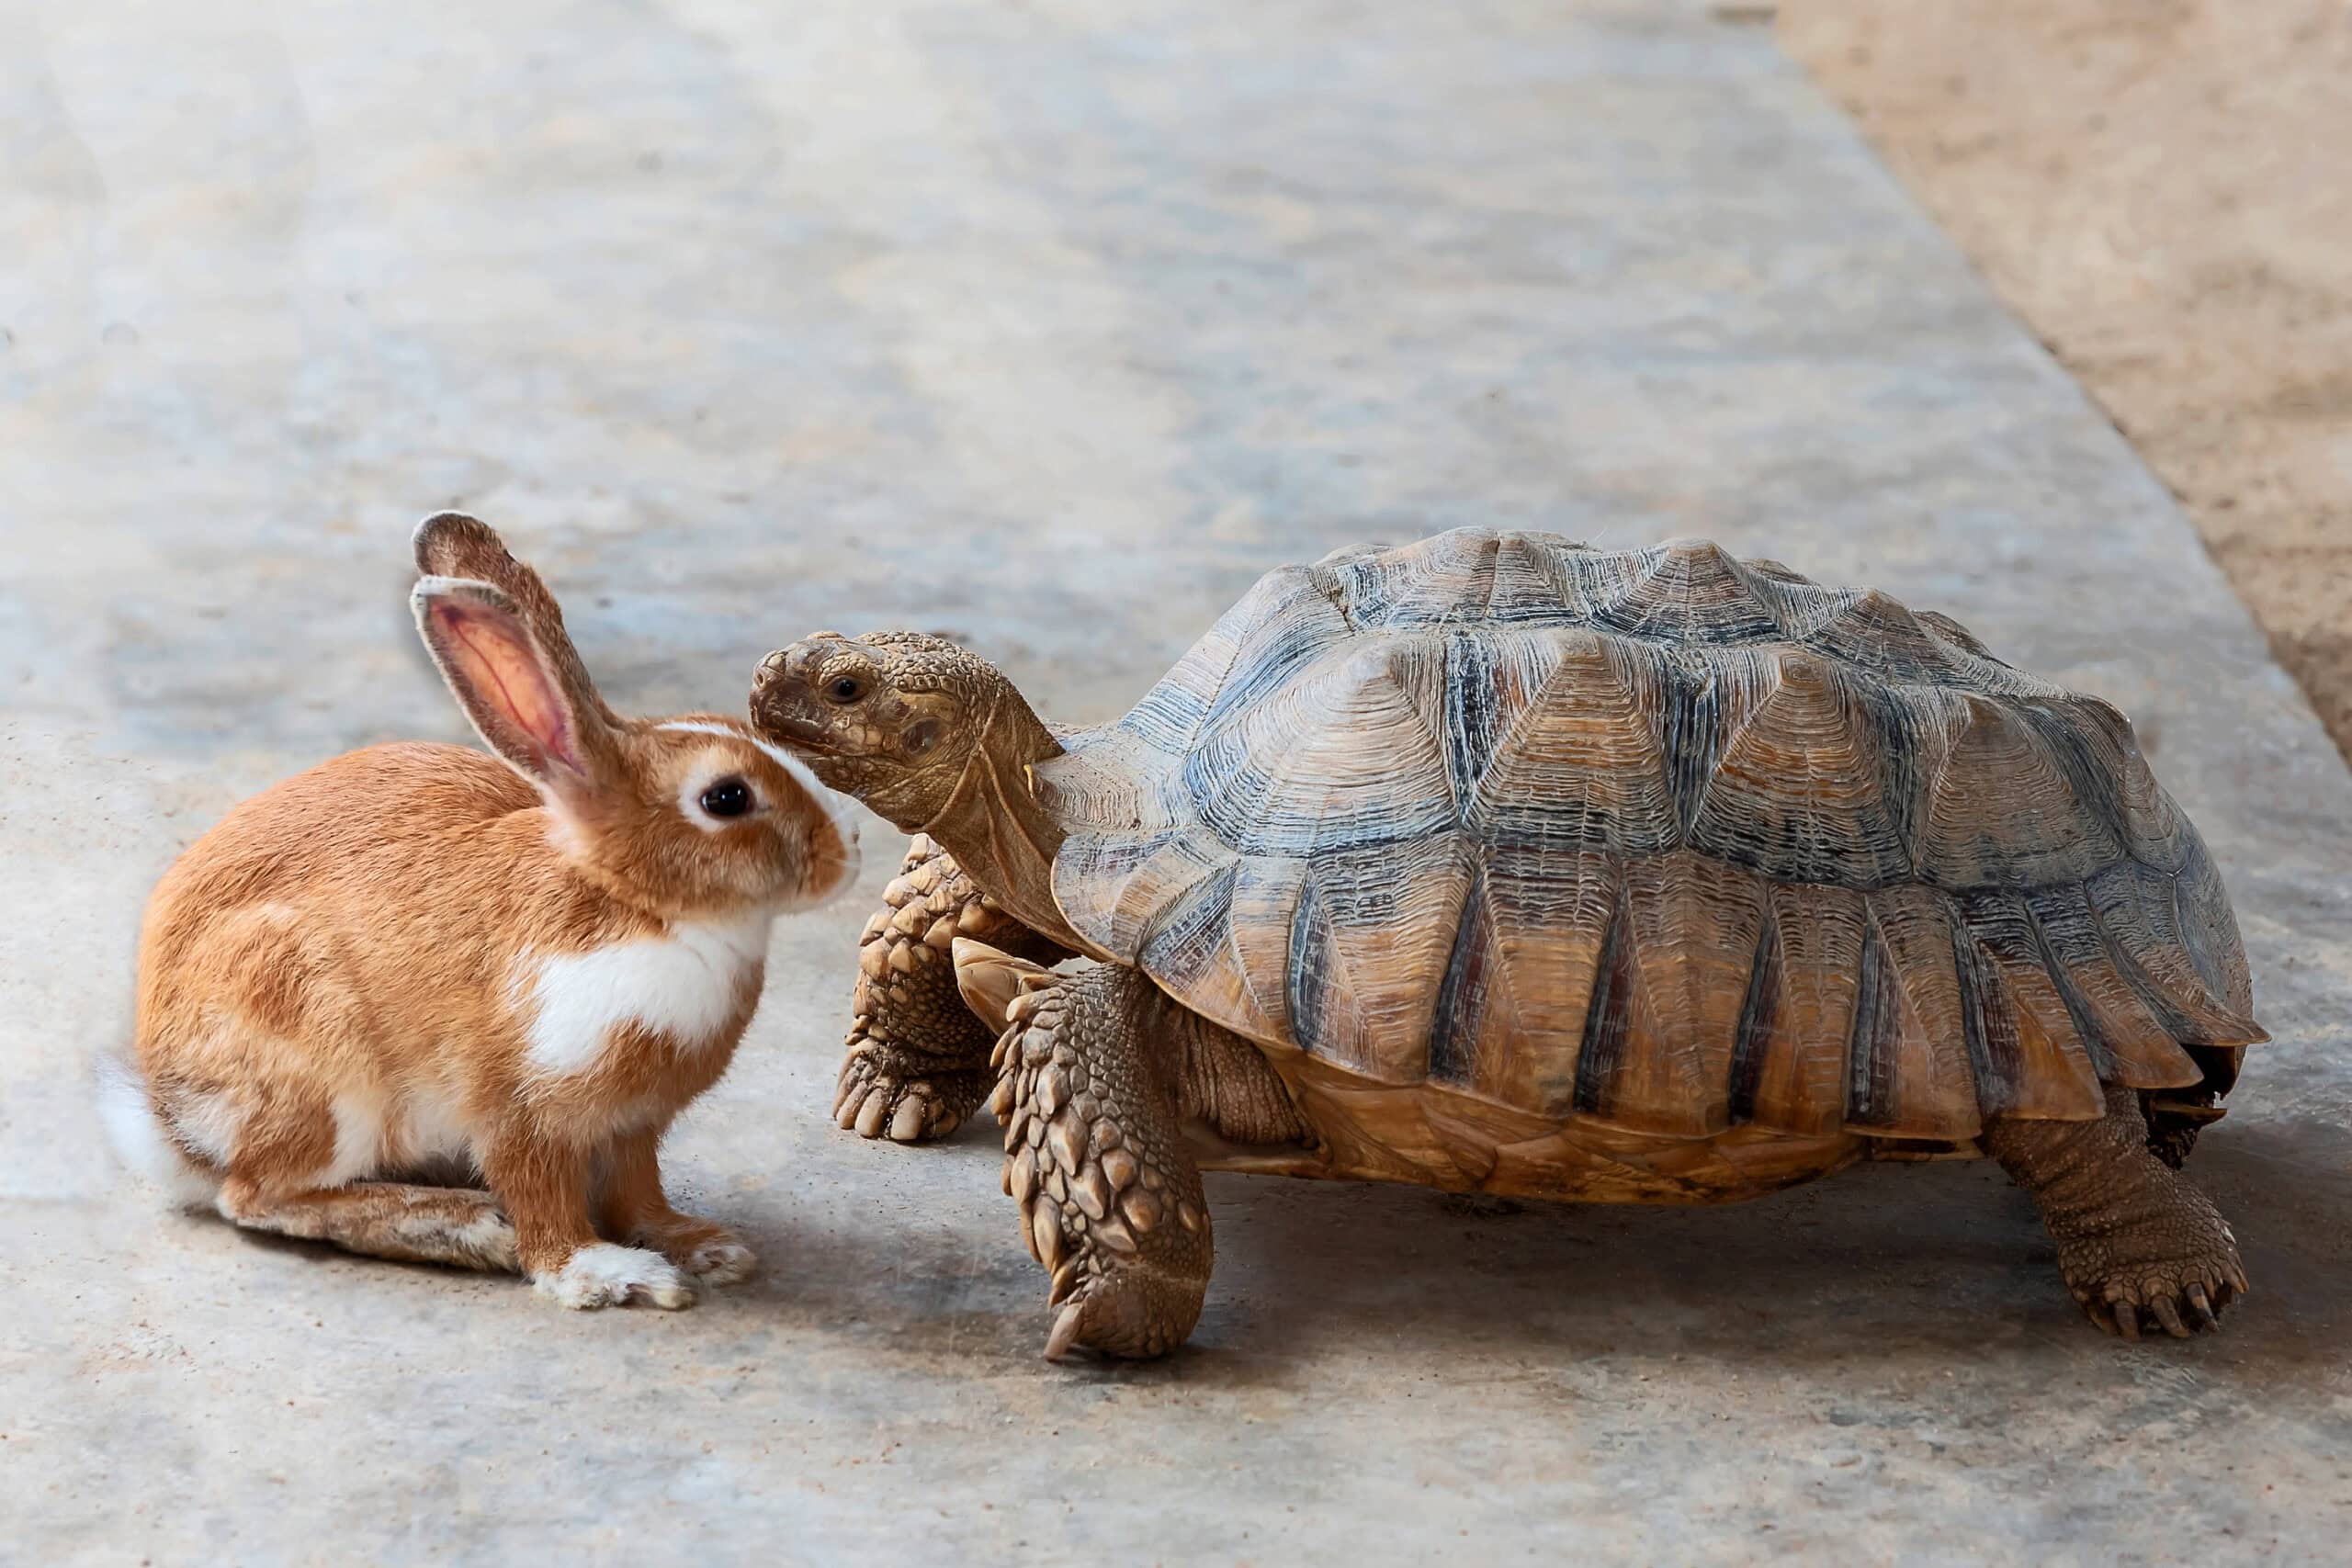 Rabbit and turtle are discussing the competition.